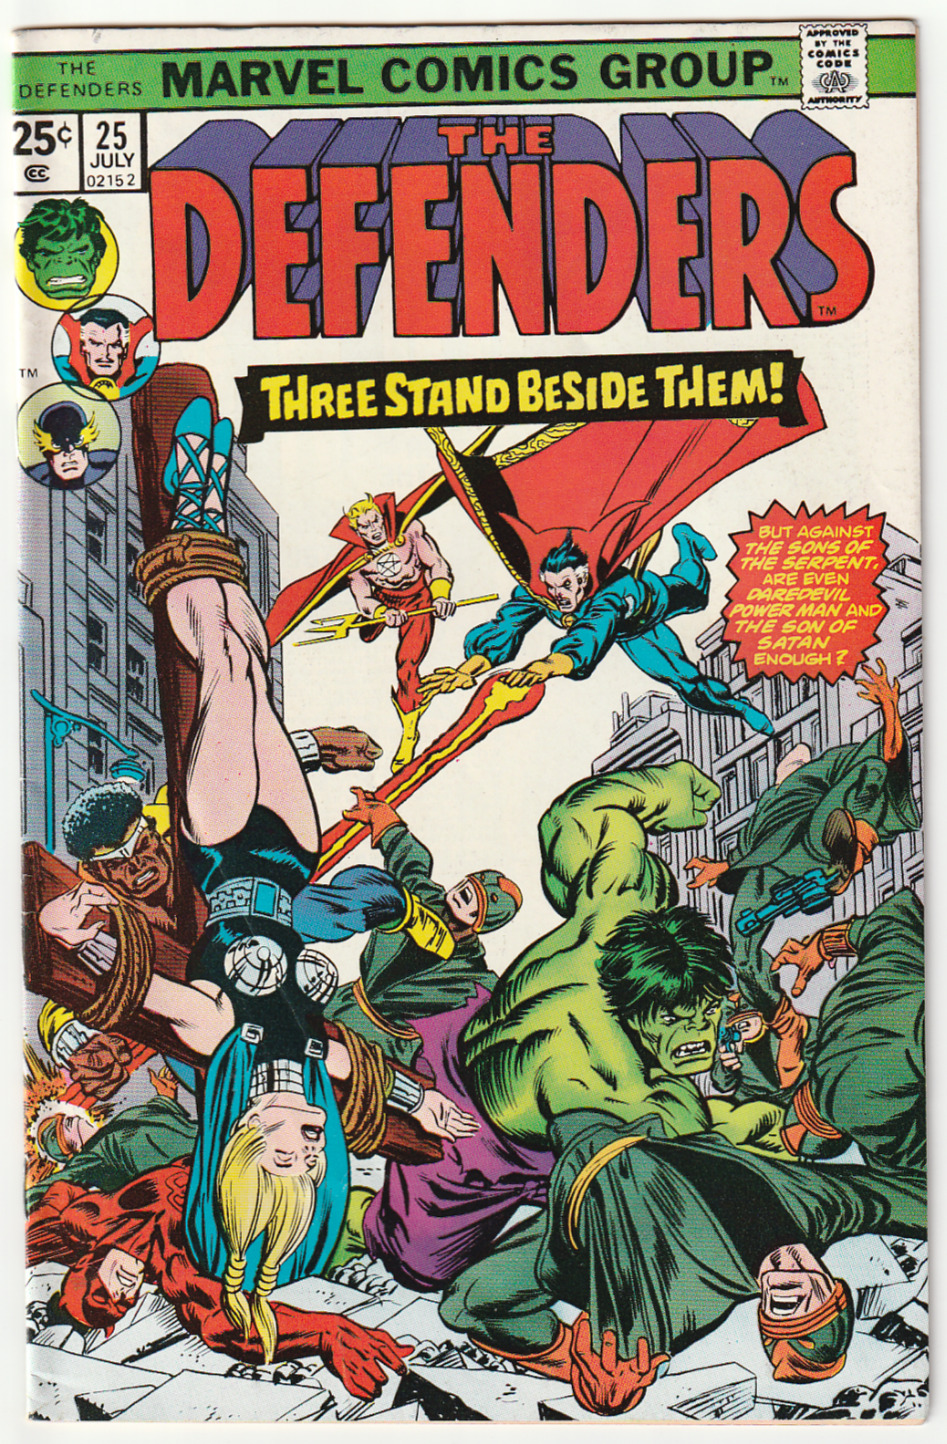 The Defenders #25 7.0 FN/VF 1975 Marvel Comics - Combine Shipping